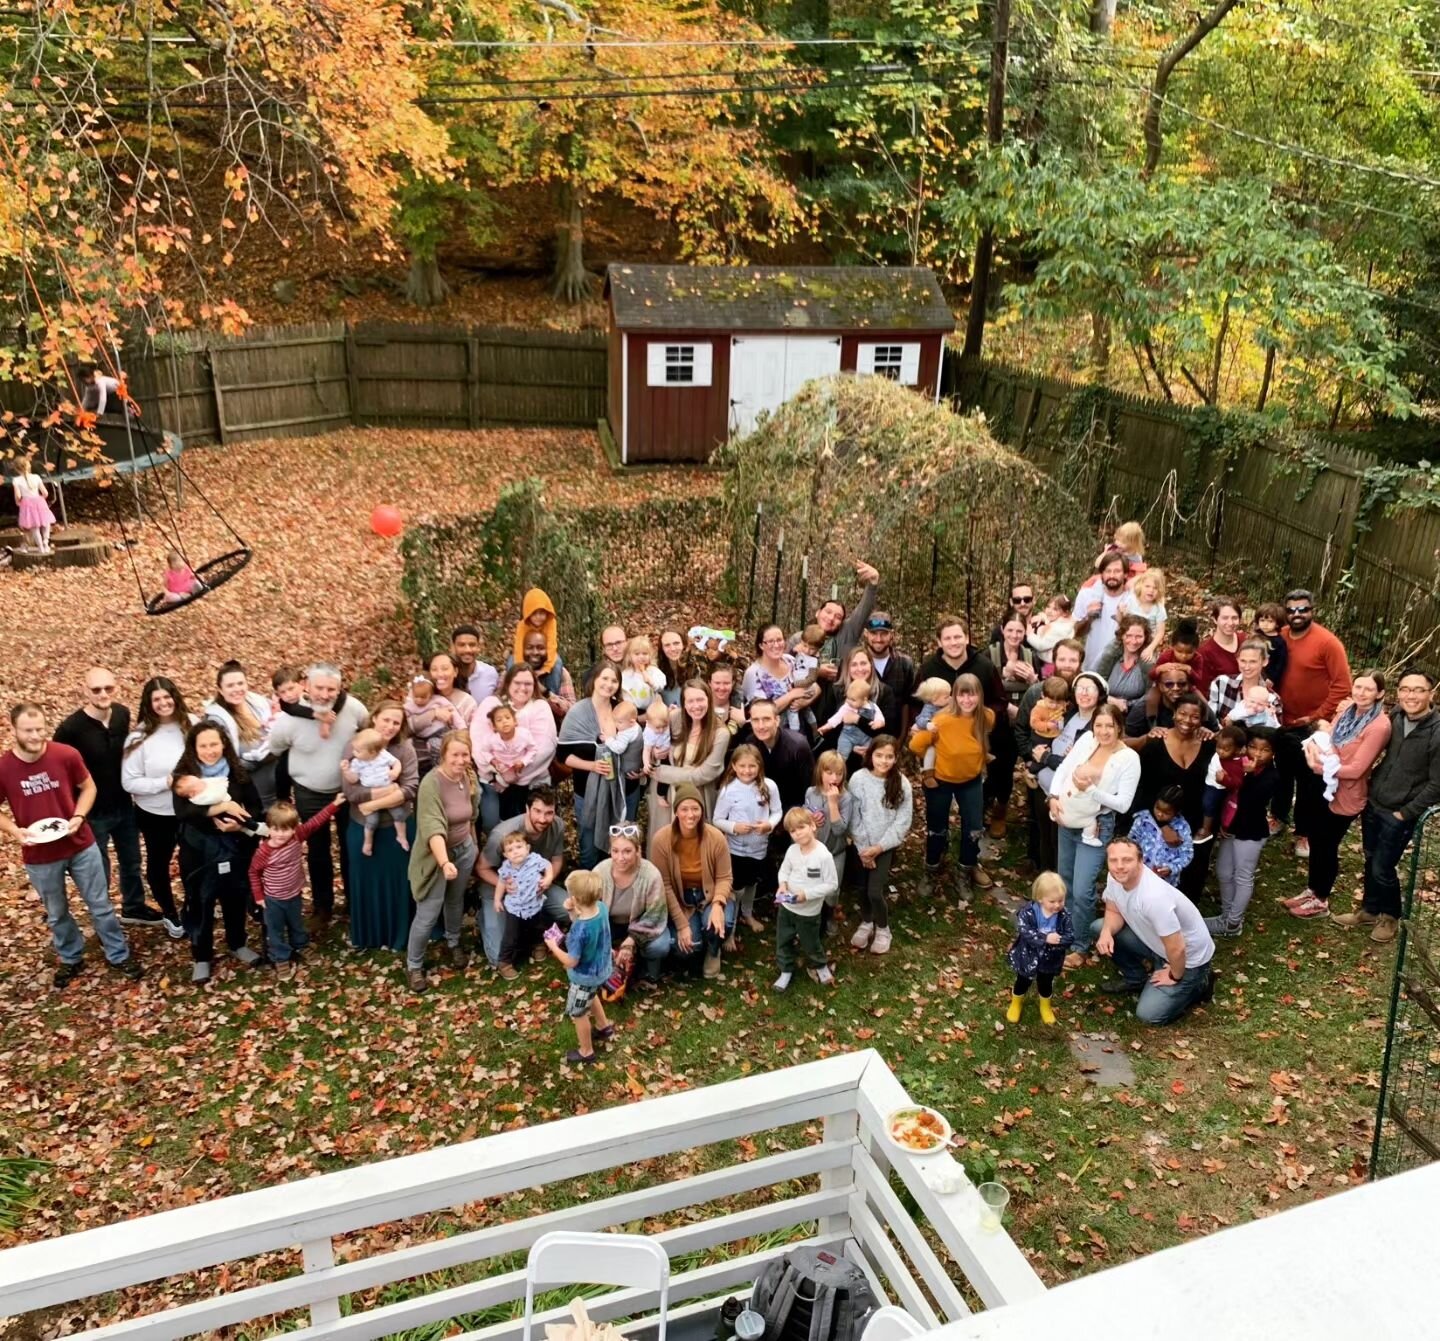 The first Moonstone Potluck! We had the most beautiful weather, delicious food, boundless love, and a whole lotta busy babes! So much gratitude for the families who have invited me into their home and lives during this intimate growing season.

Being